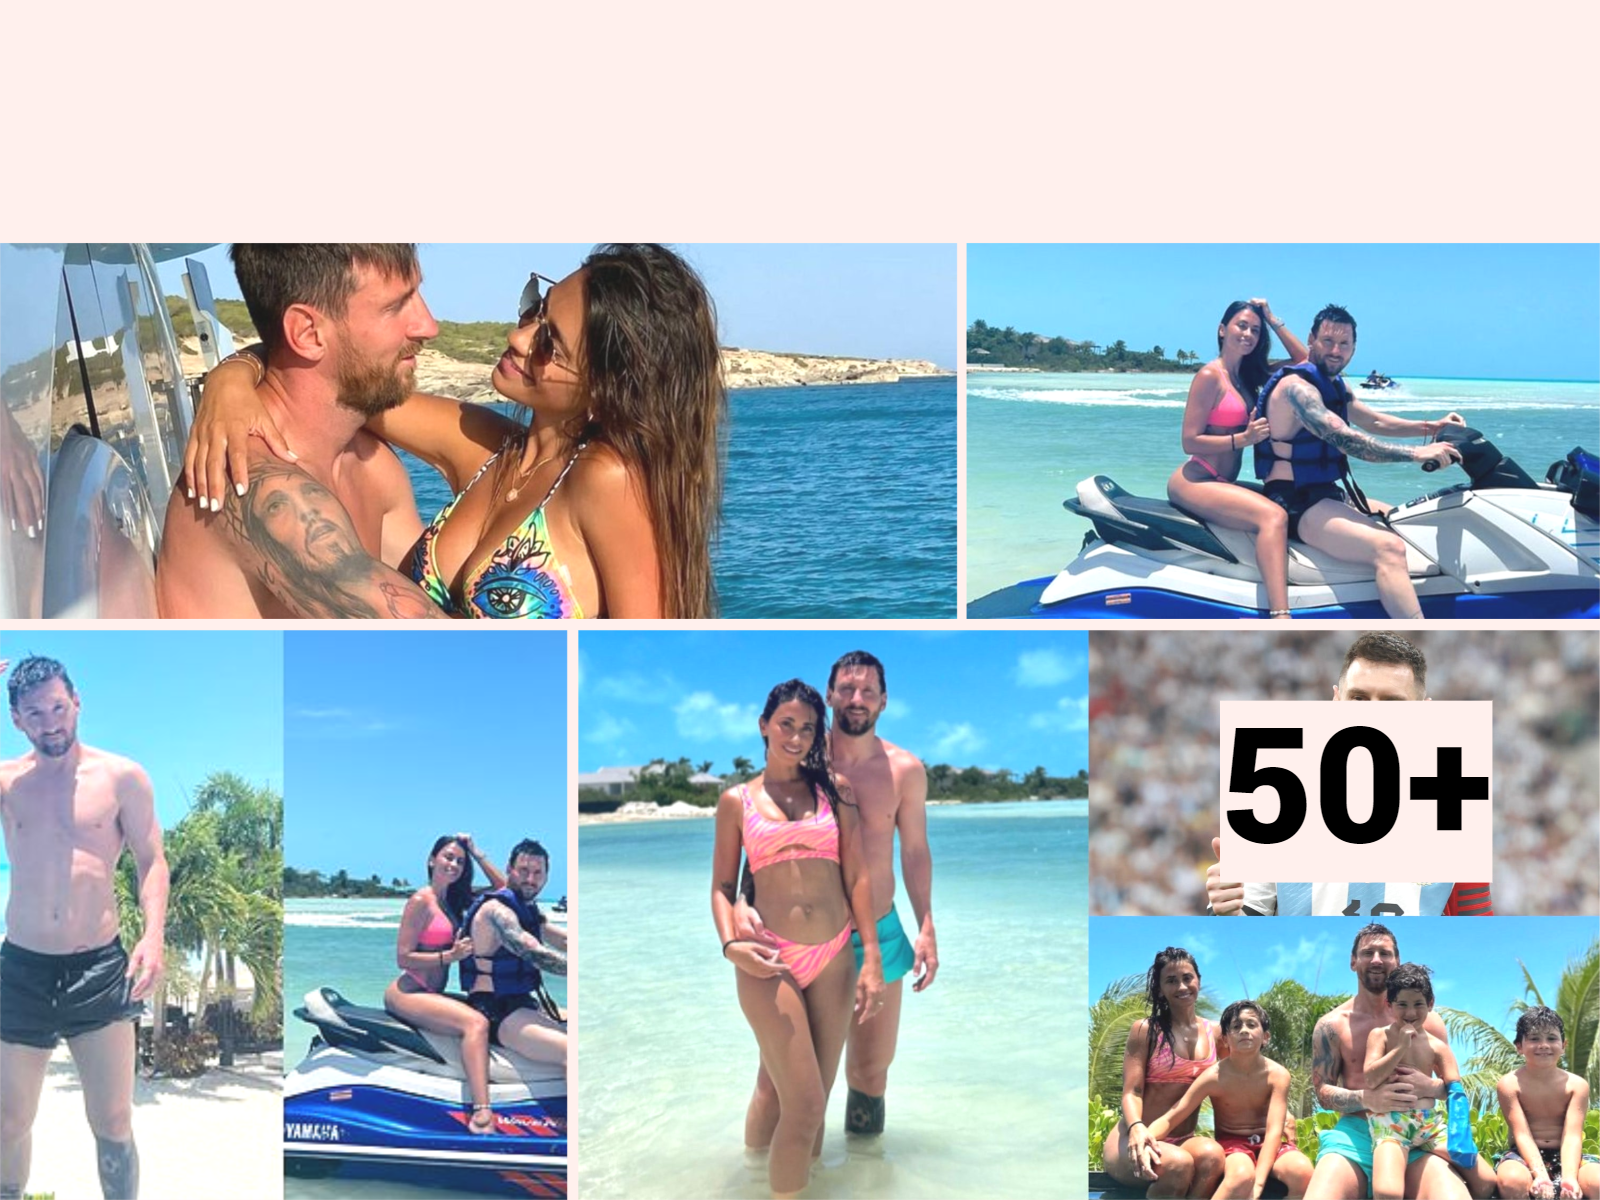 Lionel Messi enjoys his last days of vacation with his wife before making his Inter Miami debut